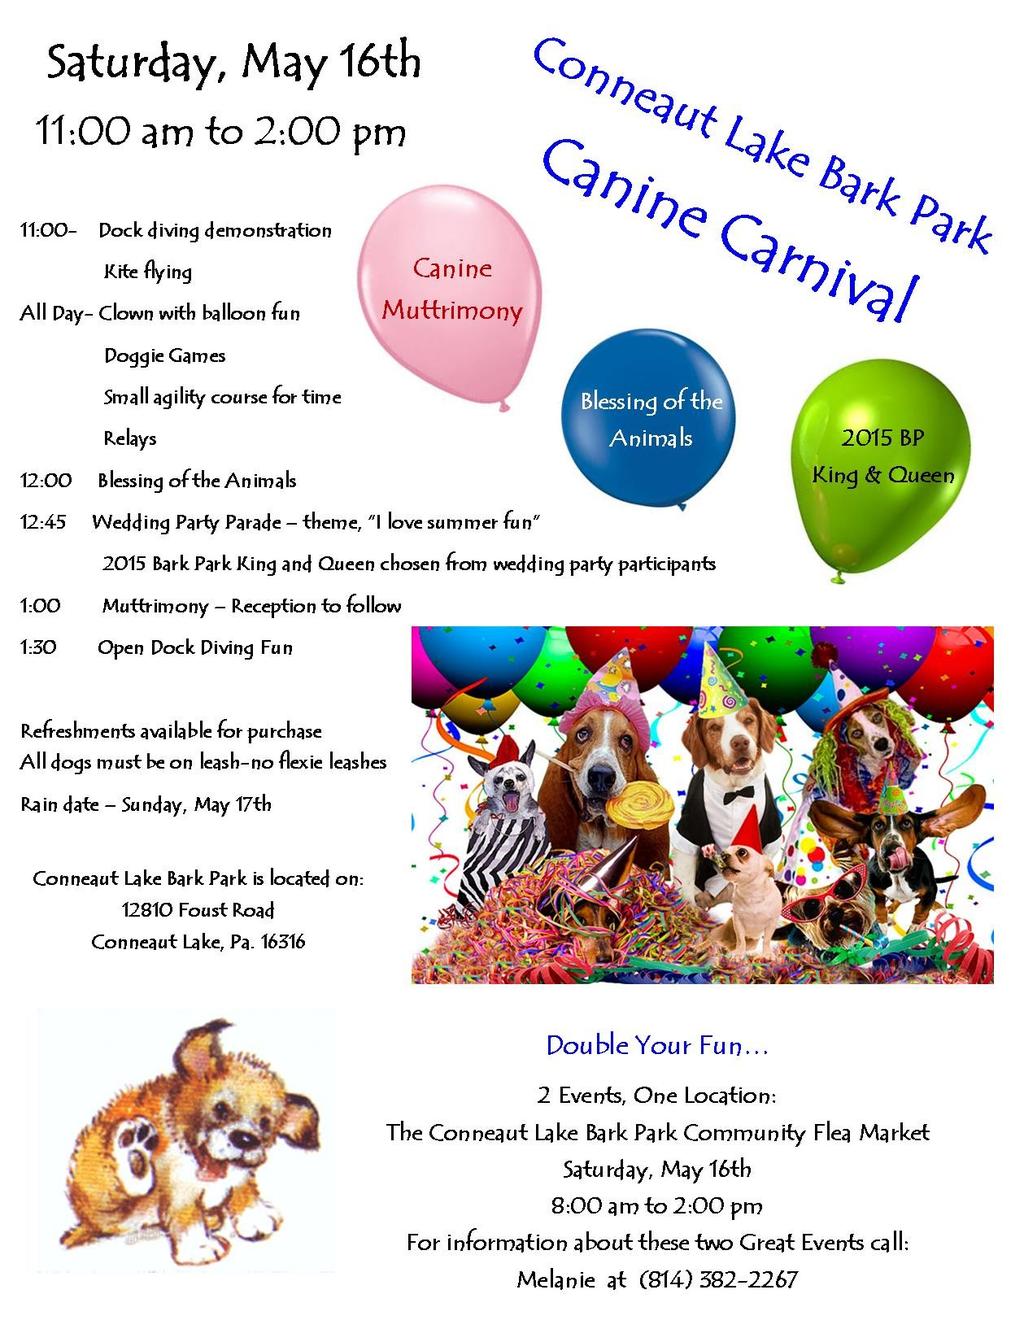 Wanted.. Kids and Their Dog Saturday, June 20 th, the Conneaut Lake Bark Park will celebrate kids and their dog. This very special day will begin at 11:00 am.